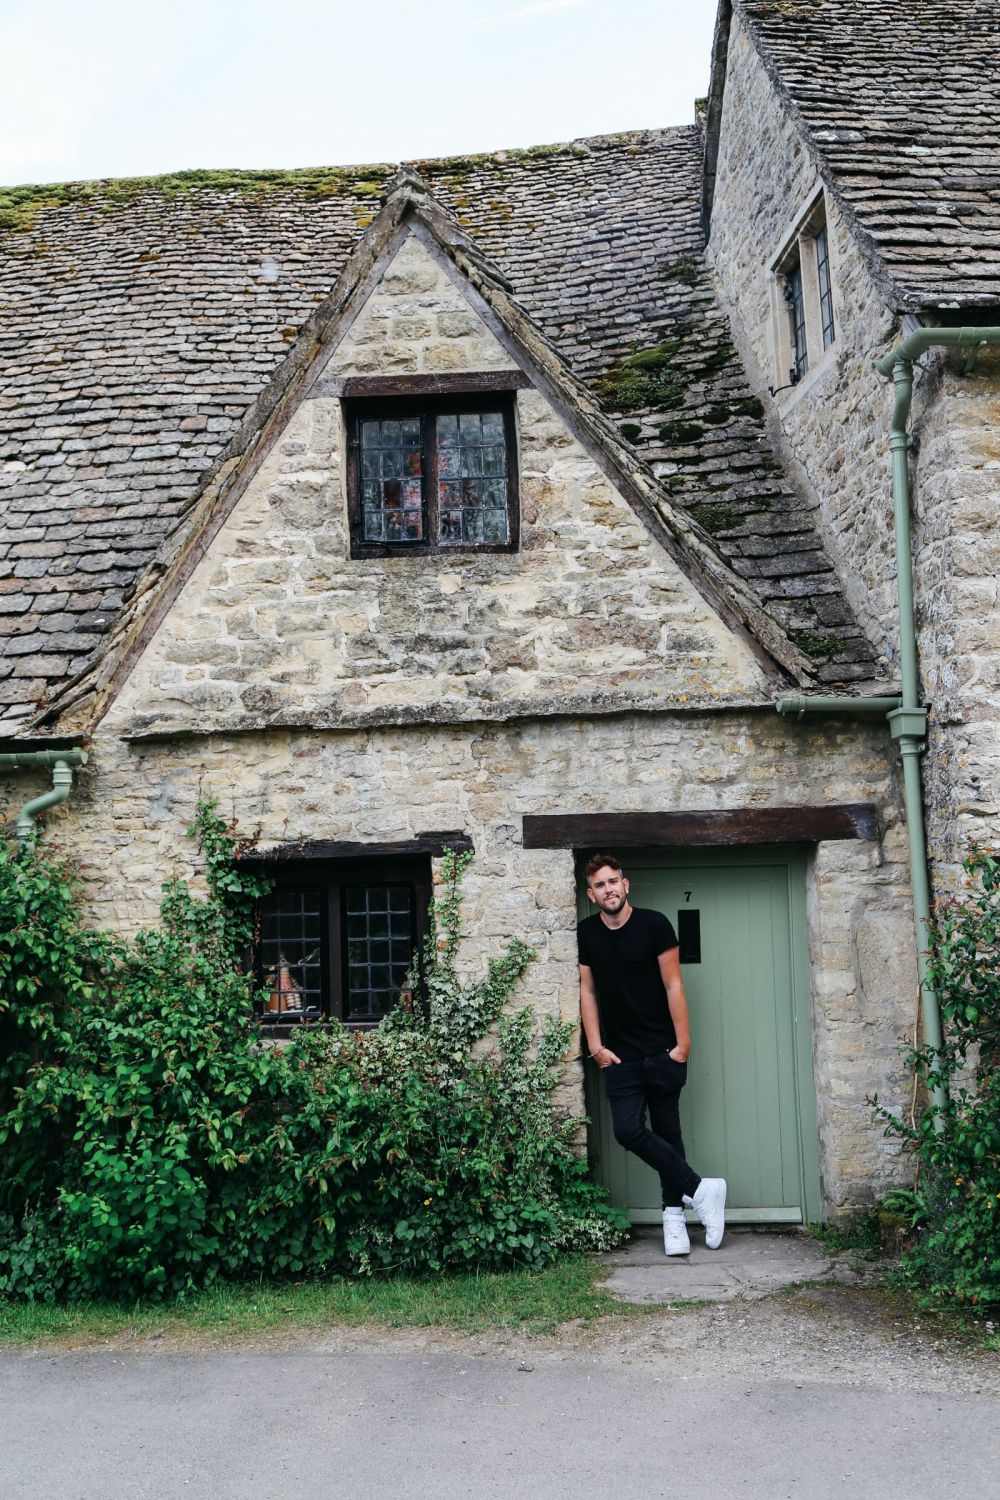 In Search Of The Most Beautiful Street In England - Arlington Row, Bibury (21)